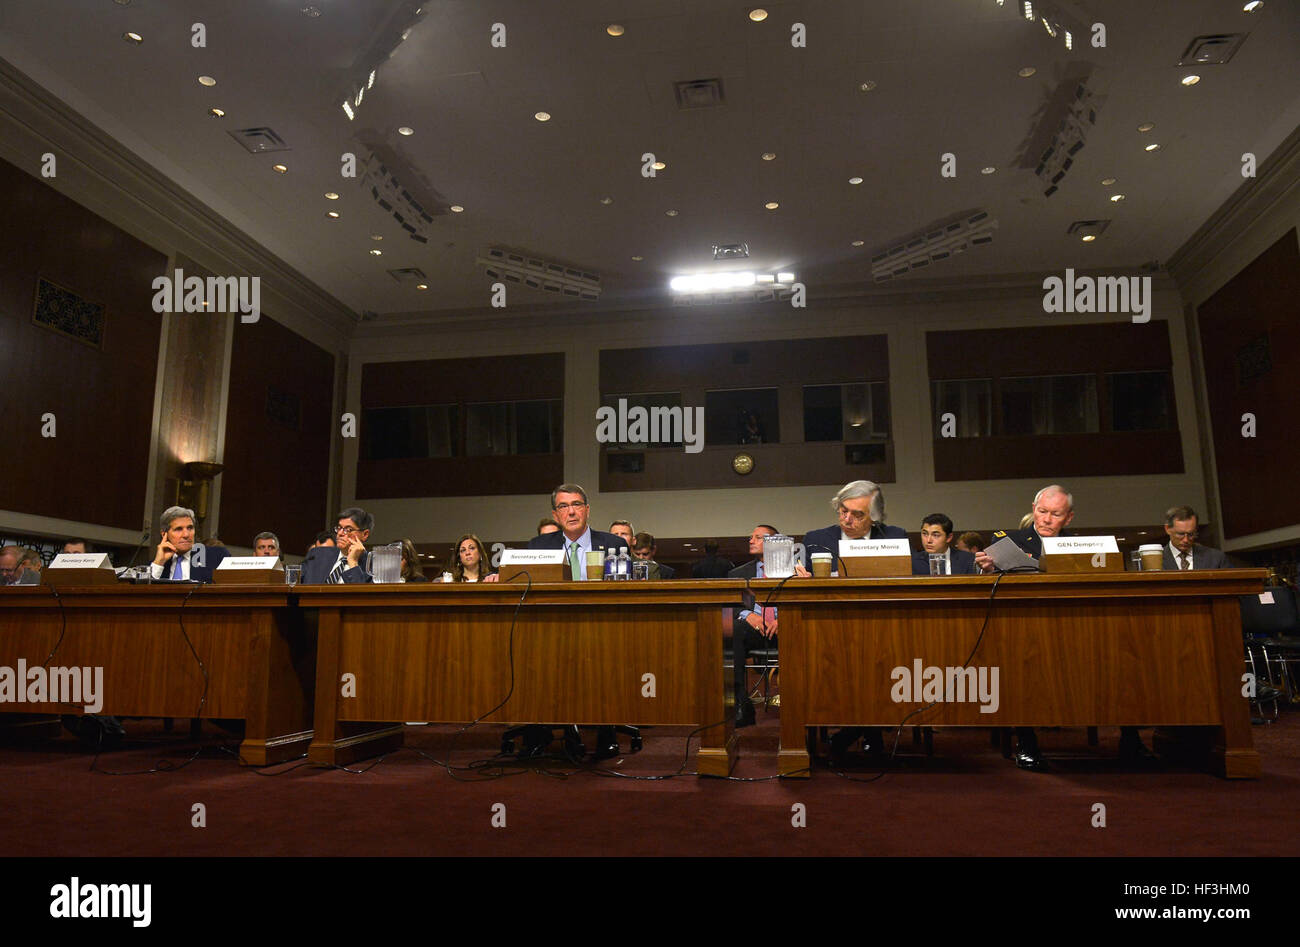 Secretary of Defense Ash Carter,center, testifies before the Senate Armed Services Committee on behalf of the Iranian nuclear deal recently brokered by the Obama administration in Washington, July 29, 2015. Carter was joined by Secretary of State John Kerry, from left, U.S. Treasury Secretary Jack Lew, Energy Secretary Ernest Moniz and Chairman of the Joint Chiefs of Staff Gen. Martin Dempsey. (DoD Photo by Glenn Fawcett /Released) Secretary of Defense Ash Carter testifies before the Senate Armed Services Committee 150729-D-NI589-293 Stock Photo